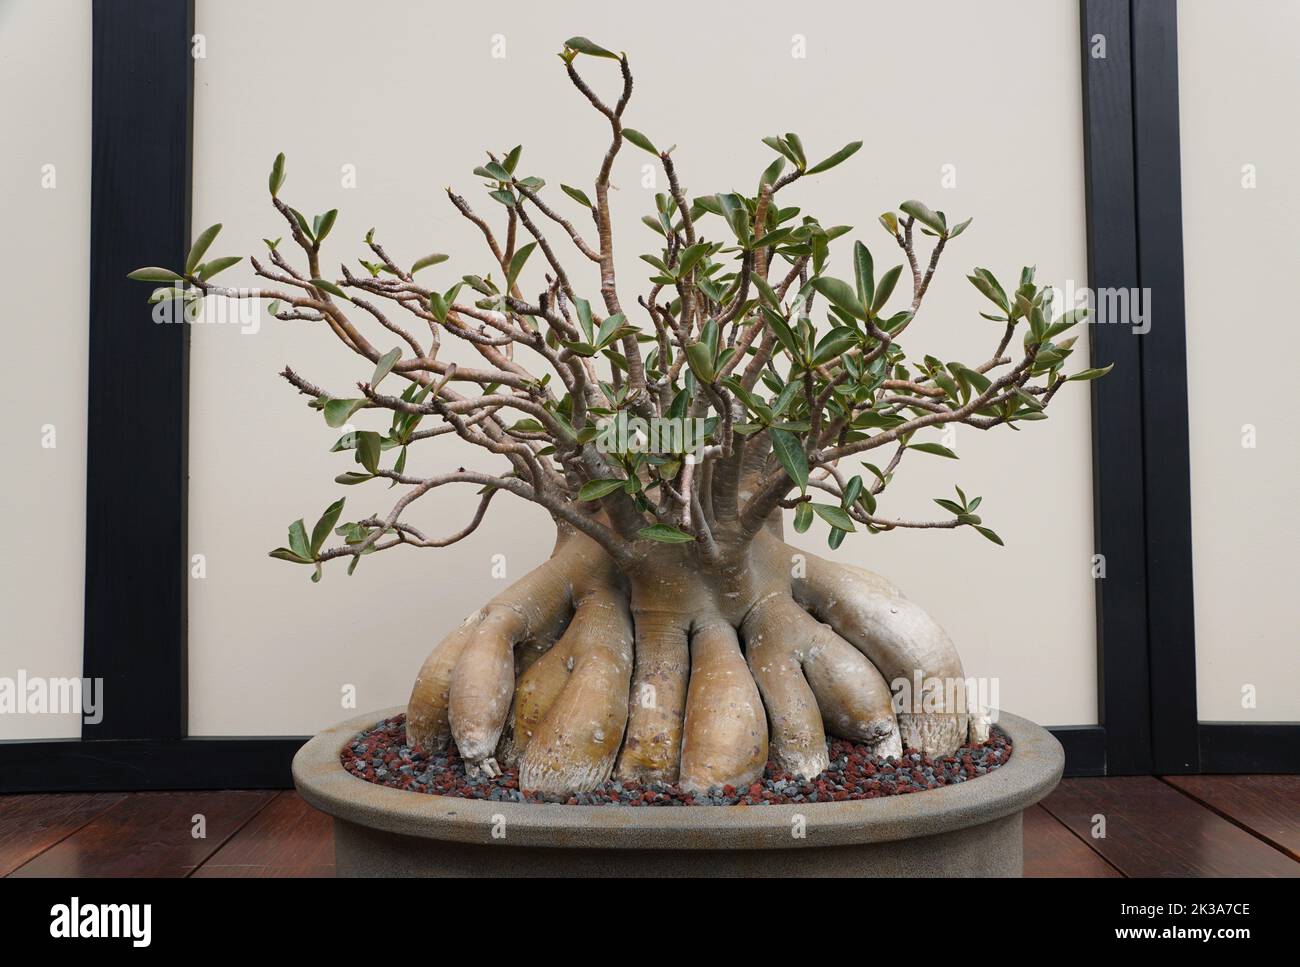 A beautiful and trained Desert Rose bonsai tree with thick bark and green leaves Stock Photo